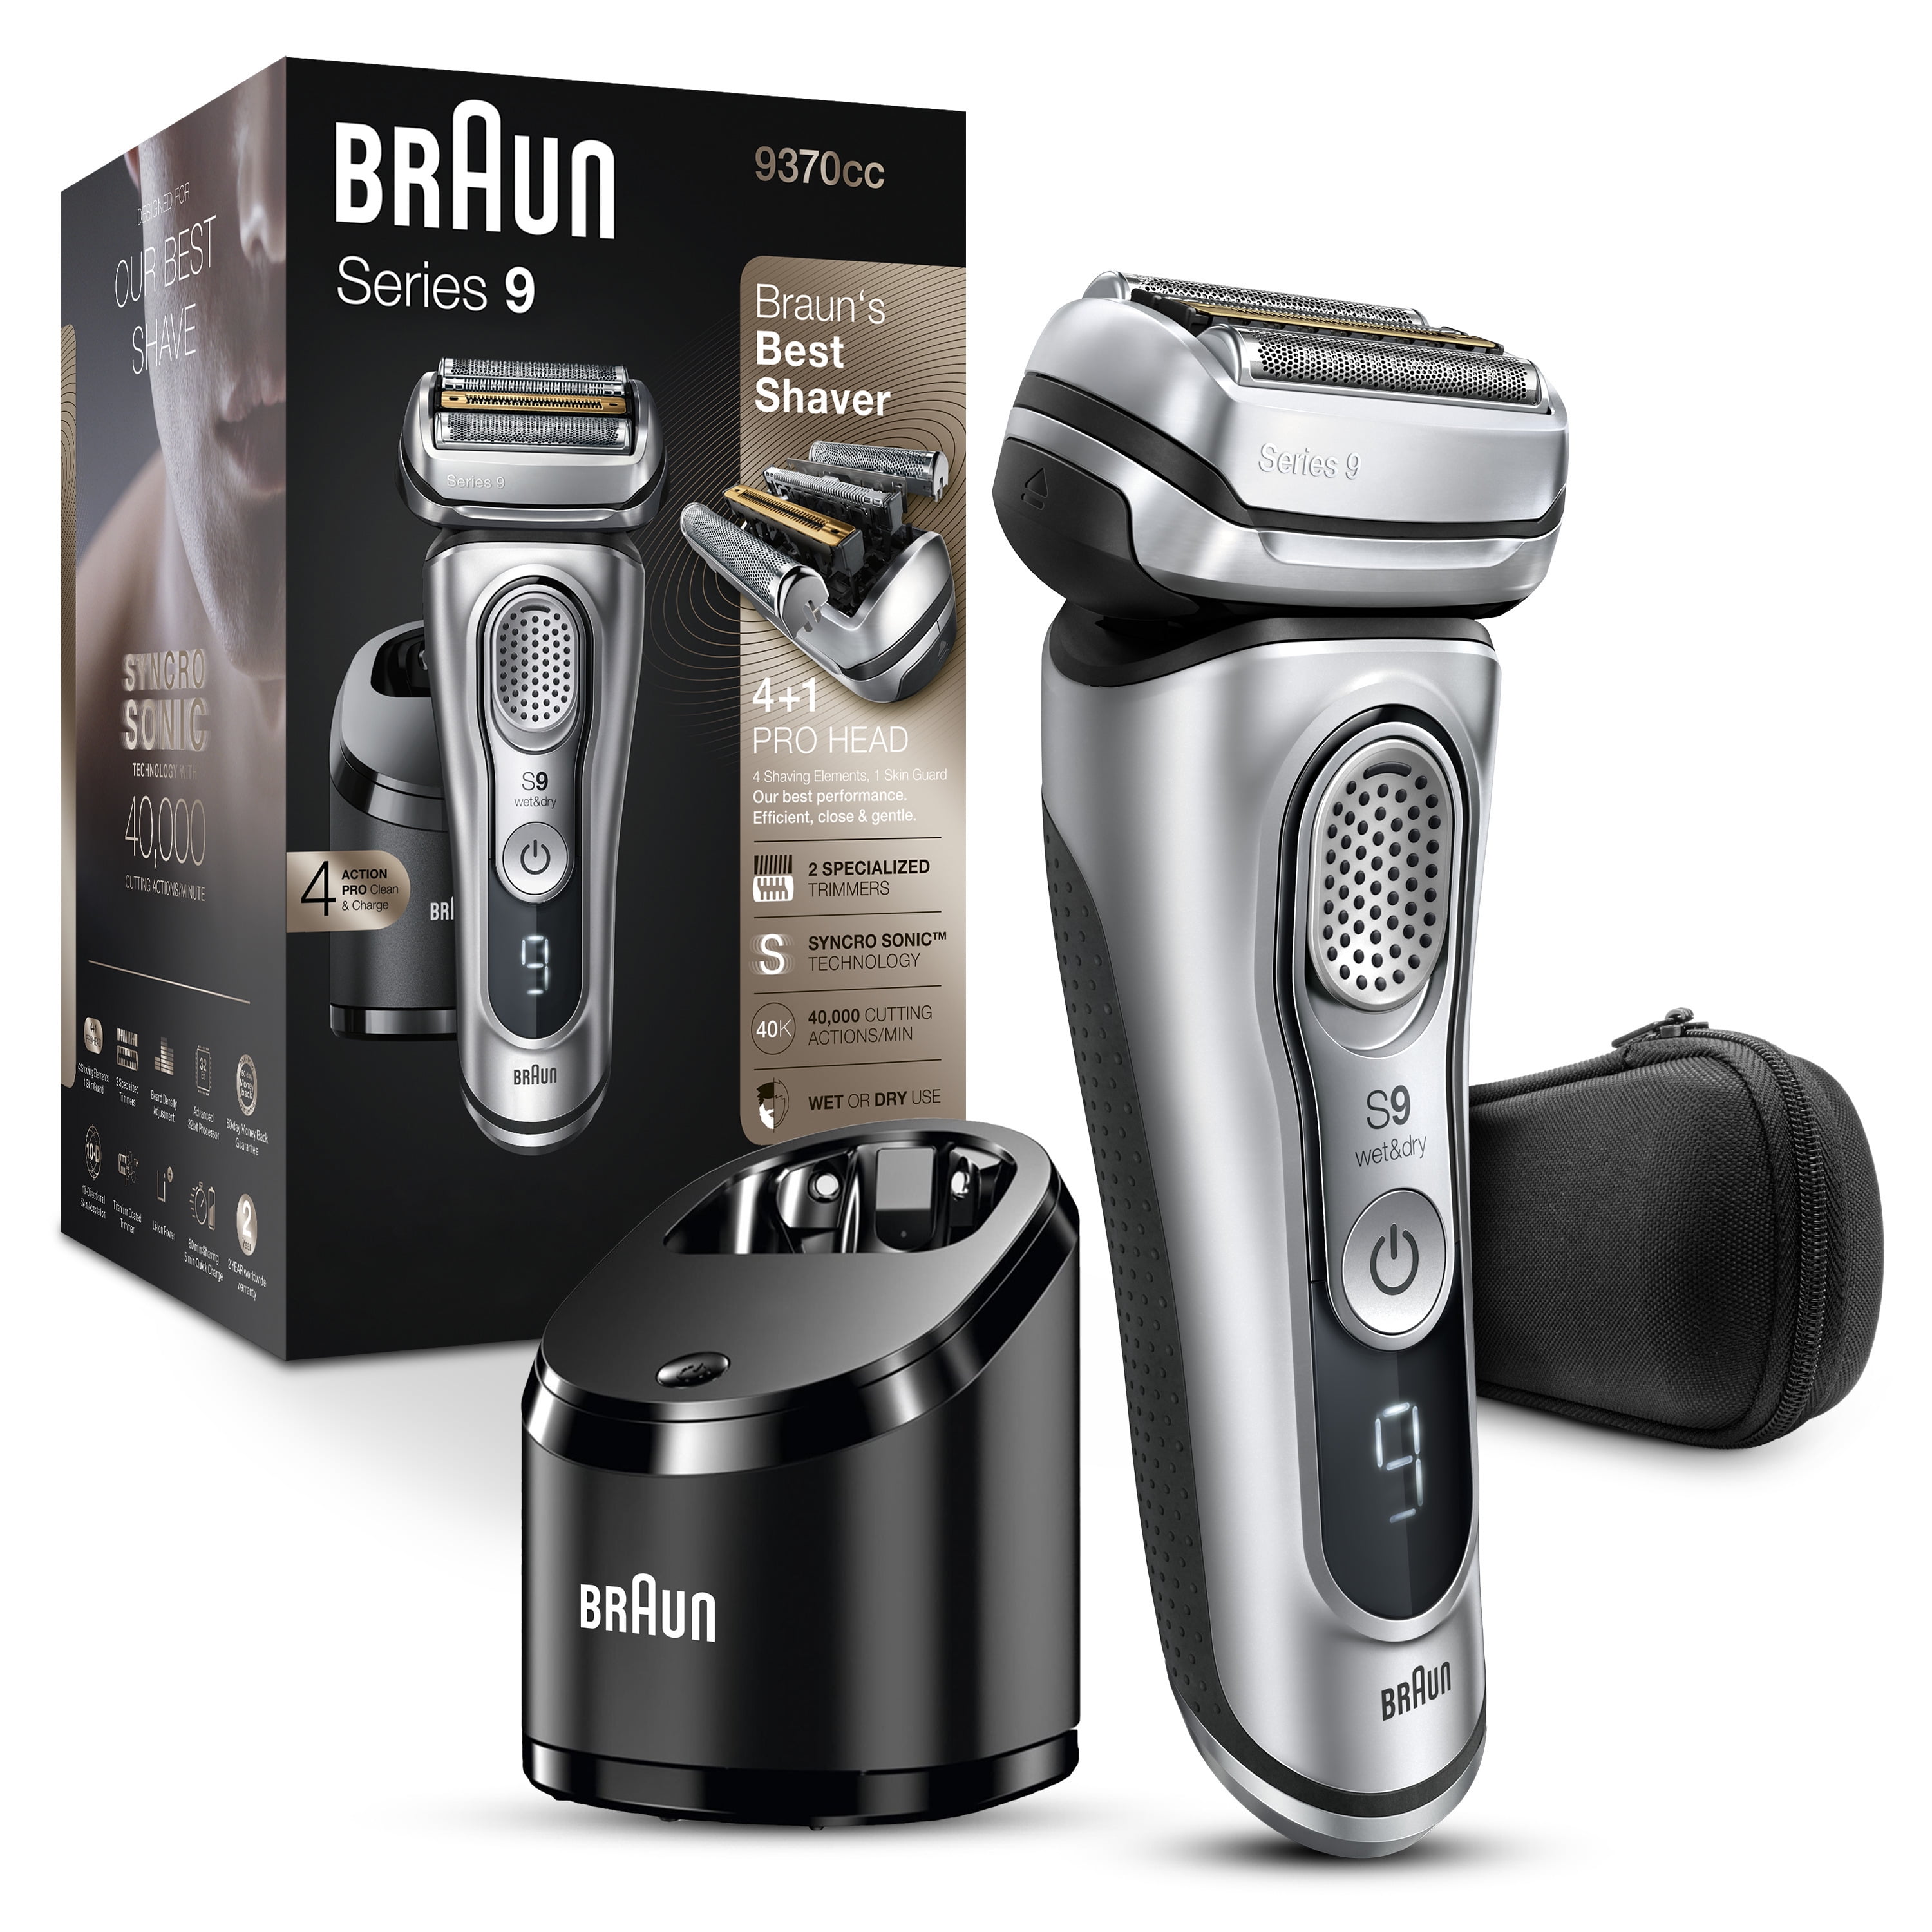 Braun Series 9 9280cc Electric Shaver Wet & Dry Self Cleaning Trimmer